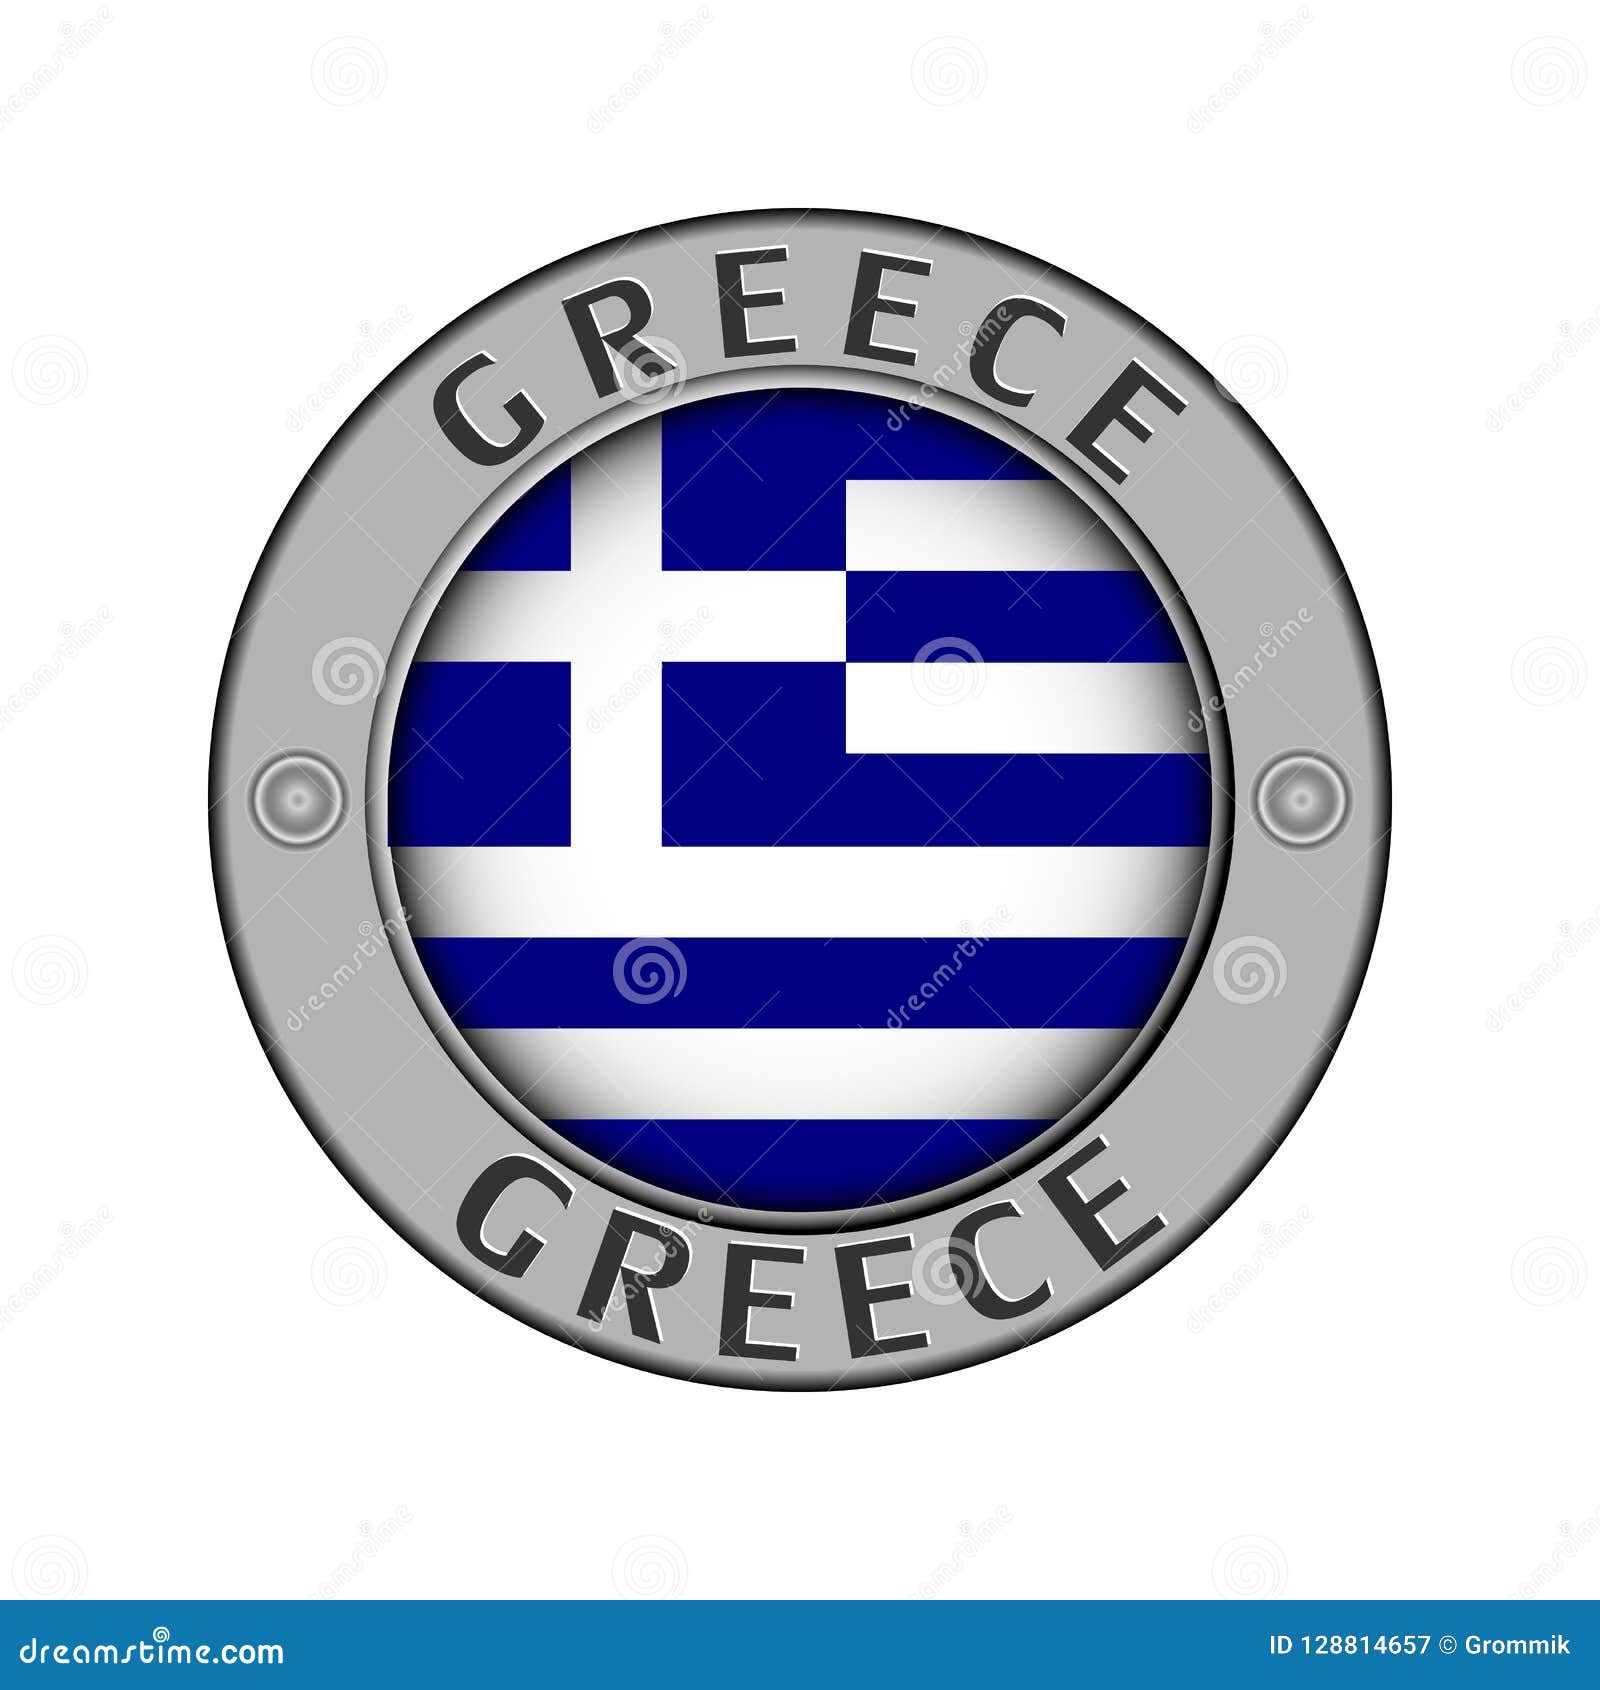 medallion-with-the-name-of-the-country-of-greece-and-a-round-fla-stock